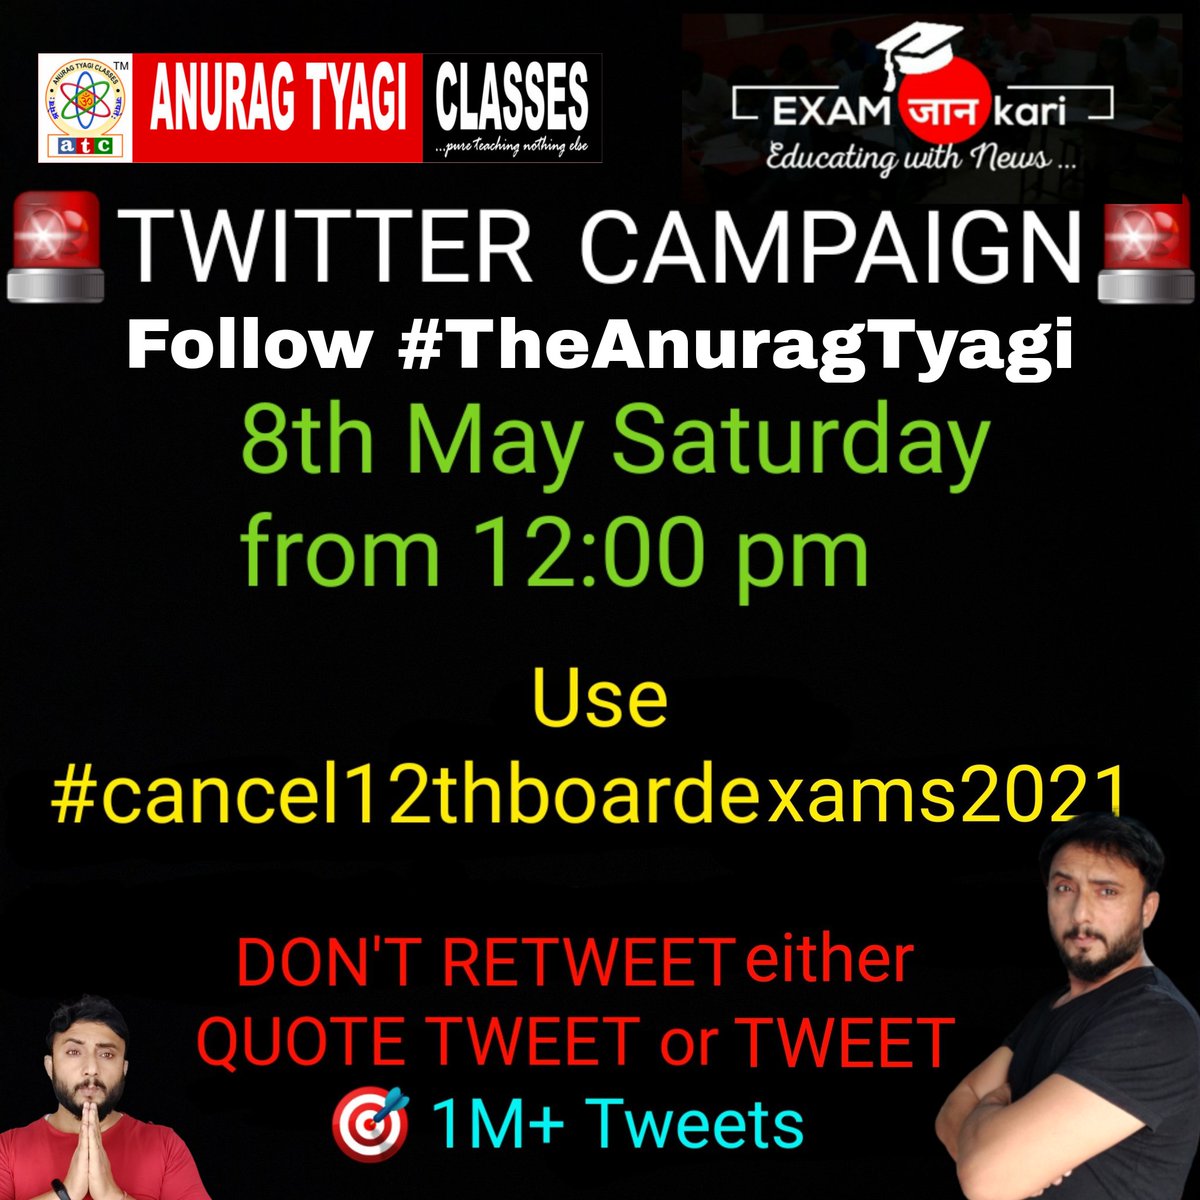 These are breaking students because they want to become famous. See both youtubers are posting different hashtags on same date how will be Trend

Jo bhi meri baat se sahmat hai please share Kare🙏

#cancel12thboardexams2021 #DONTIGNORE12THSTUDENTS #jaanpebhaari12thboardexams2021